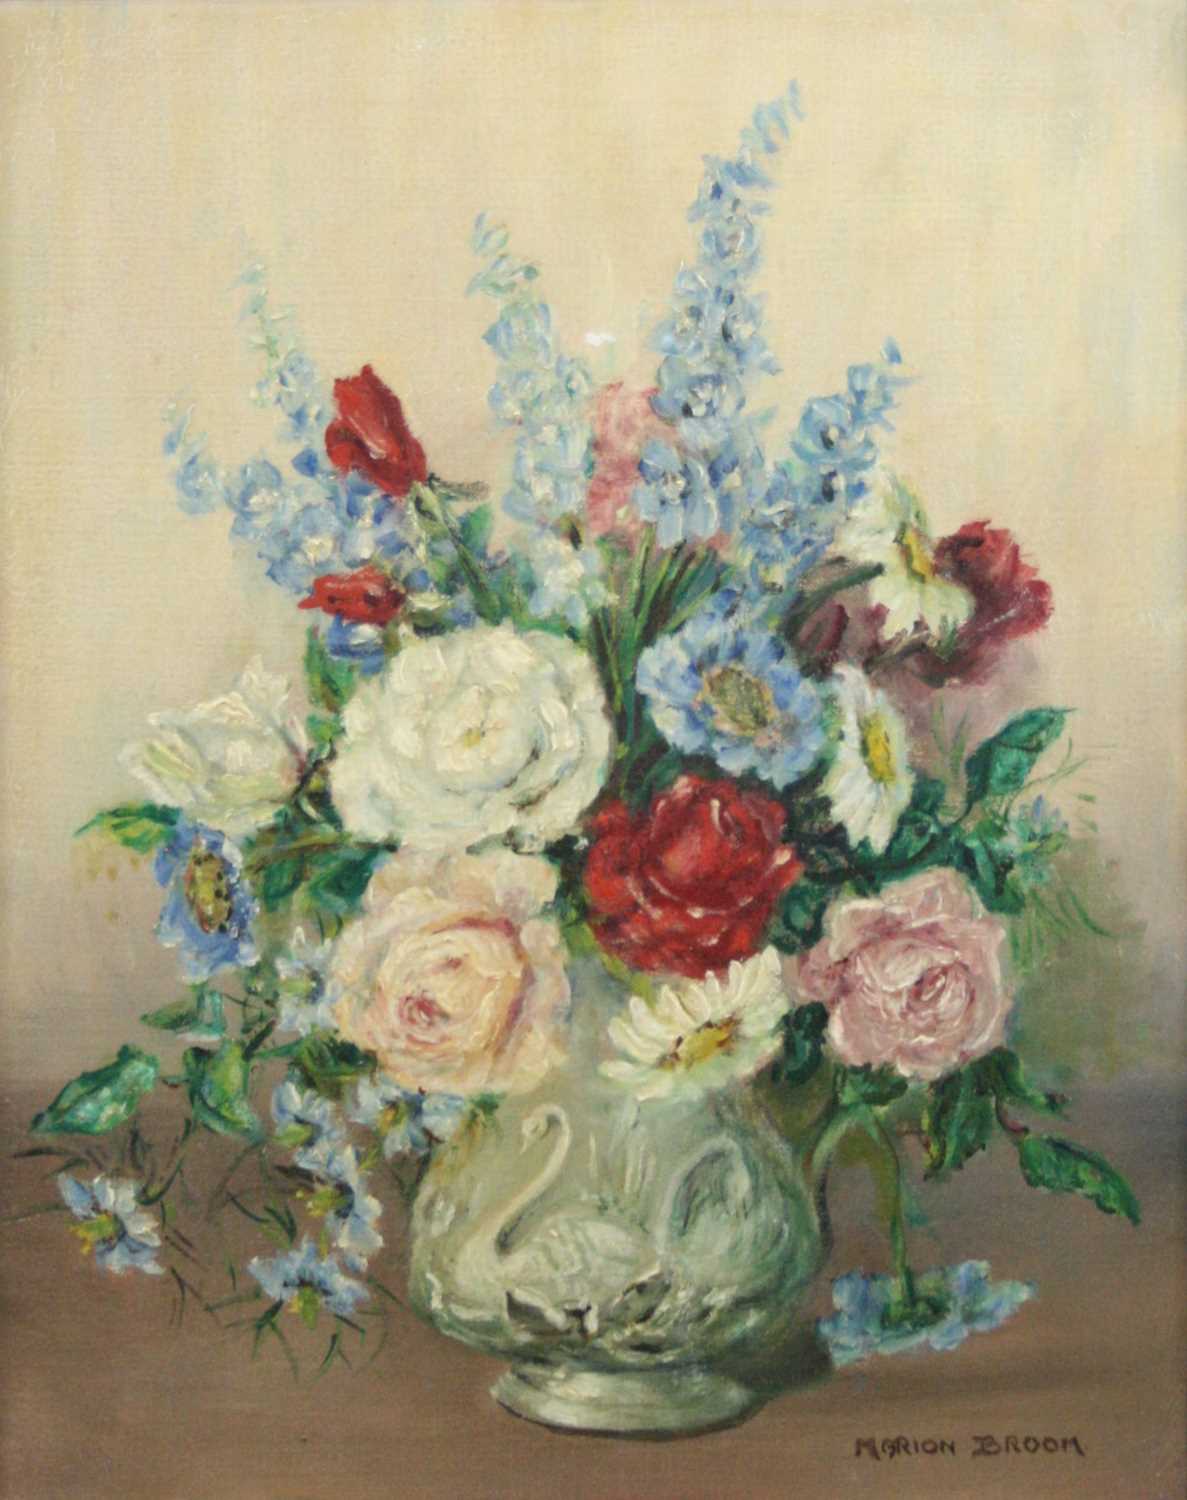 Marion Broom (1878-1962) - Still life flowers in a vase, oil on canvas, signed lower right, 51 x